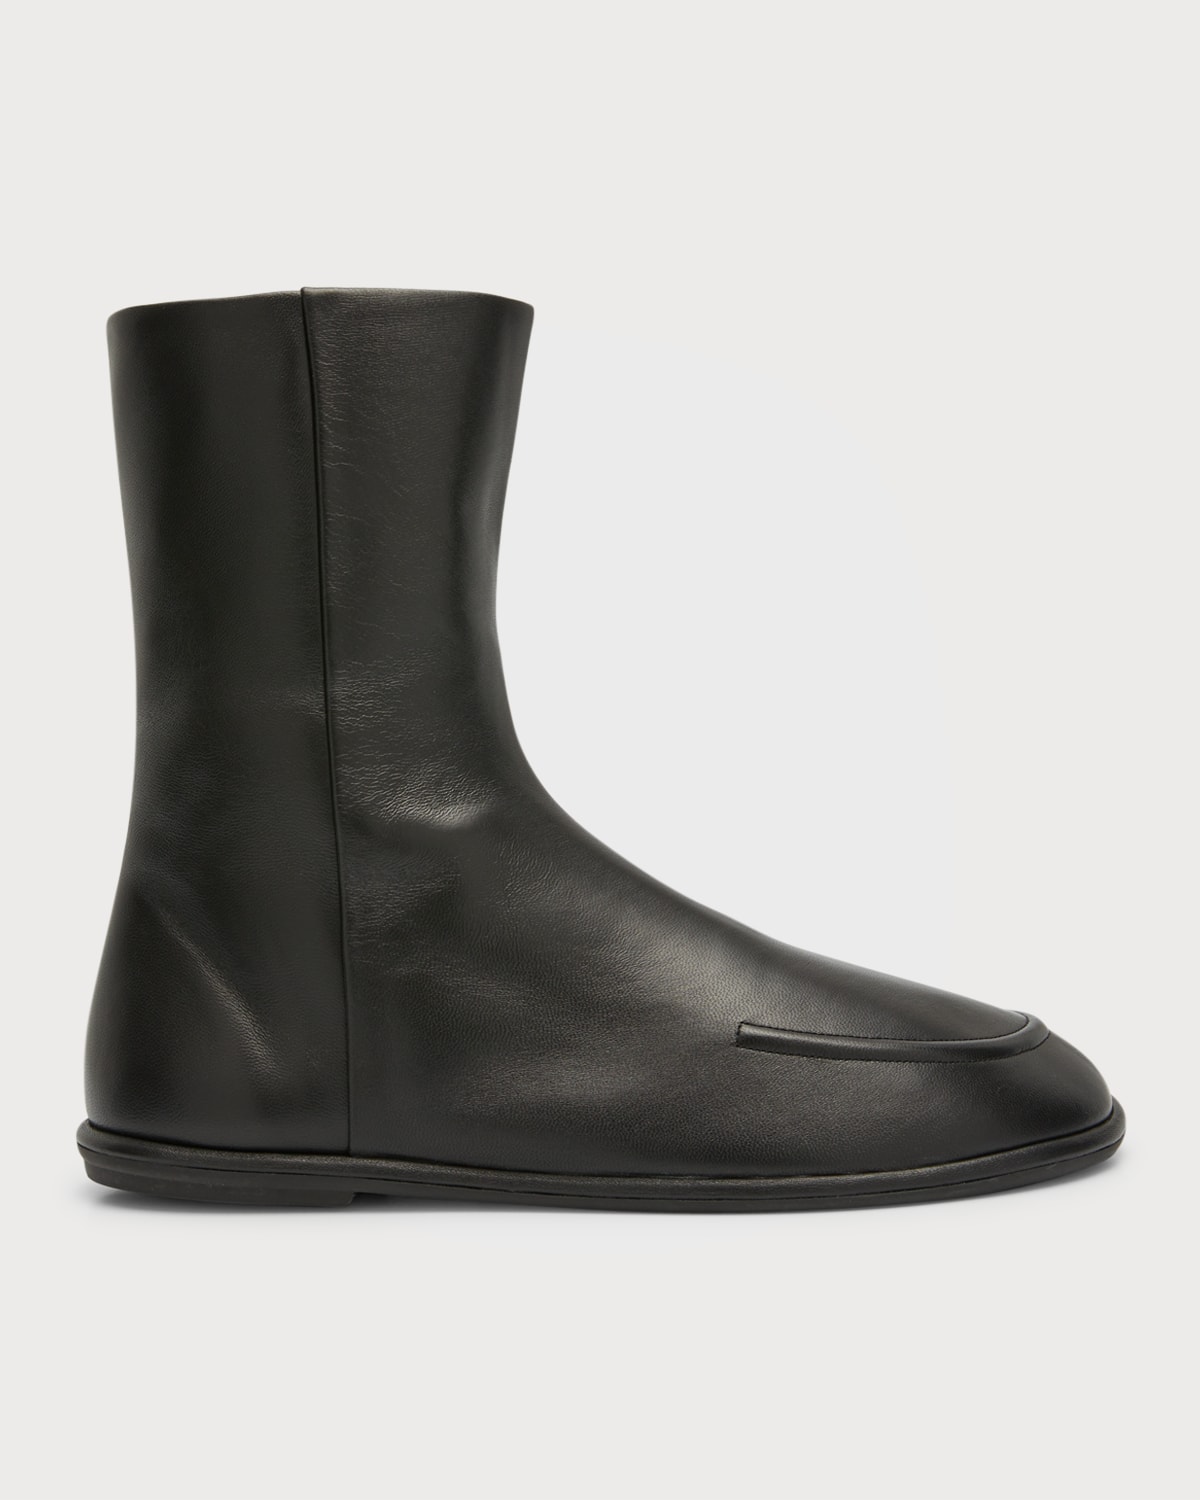 THE ROW Canal Leather Apron-Toe Booties